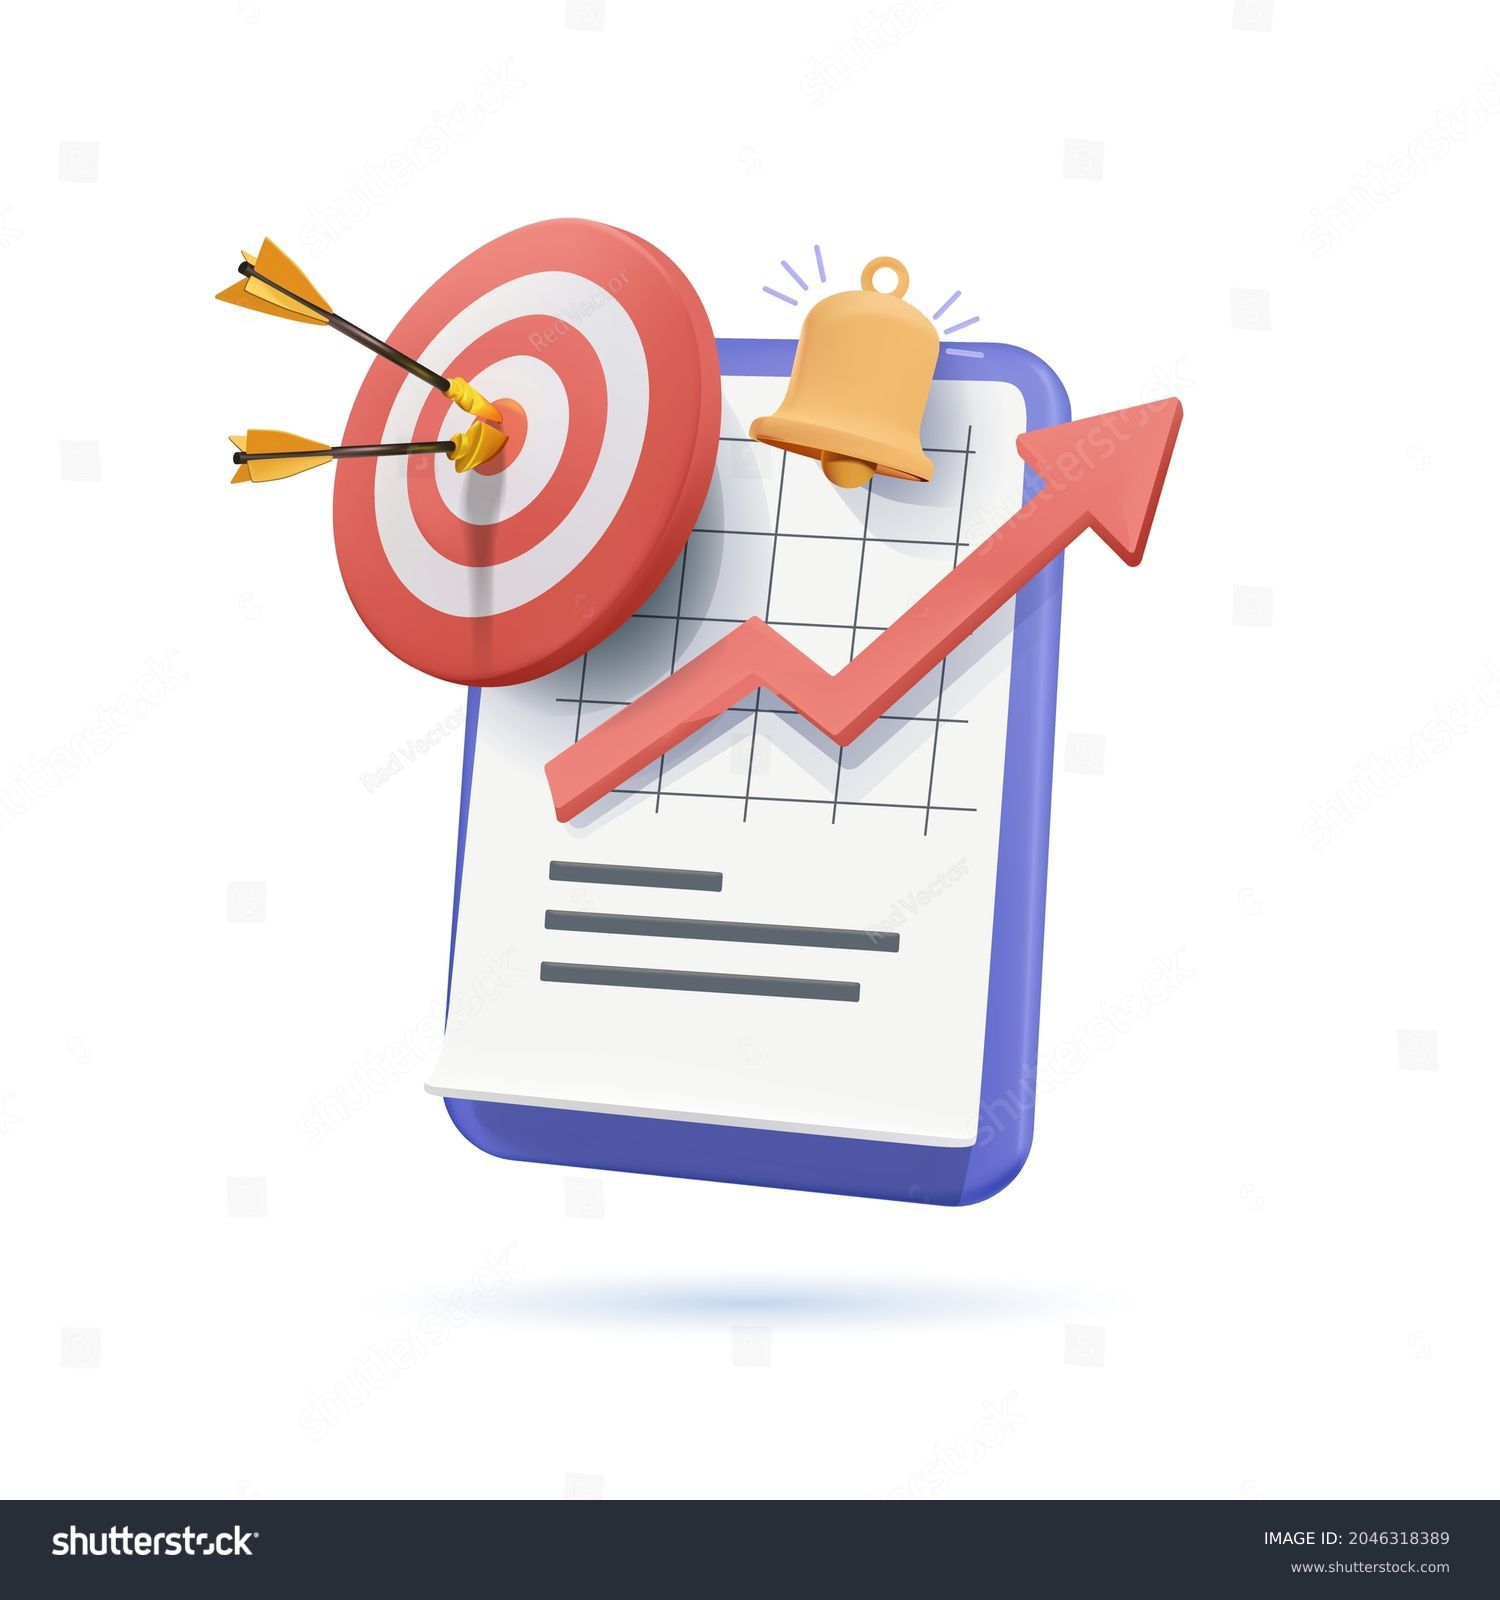 Project task management and effective time planning tools. Project development icon. 3d vector illustration. Work organizer, daily plan. Project manager tool, business, productivity online platform #2046318389